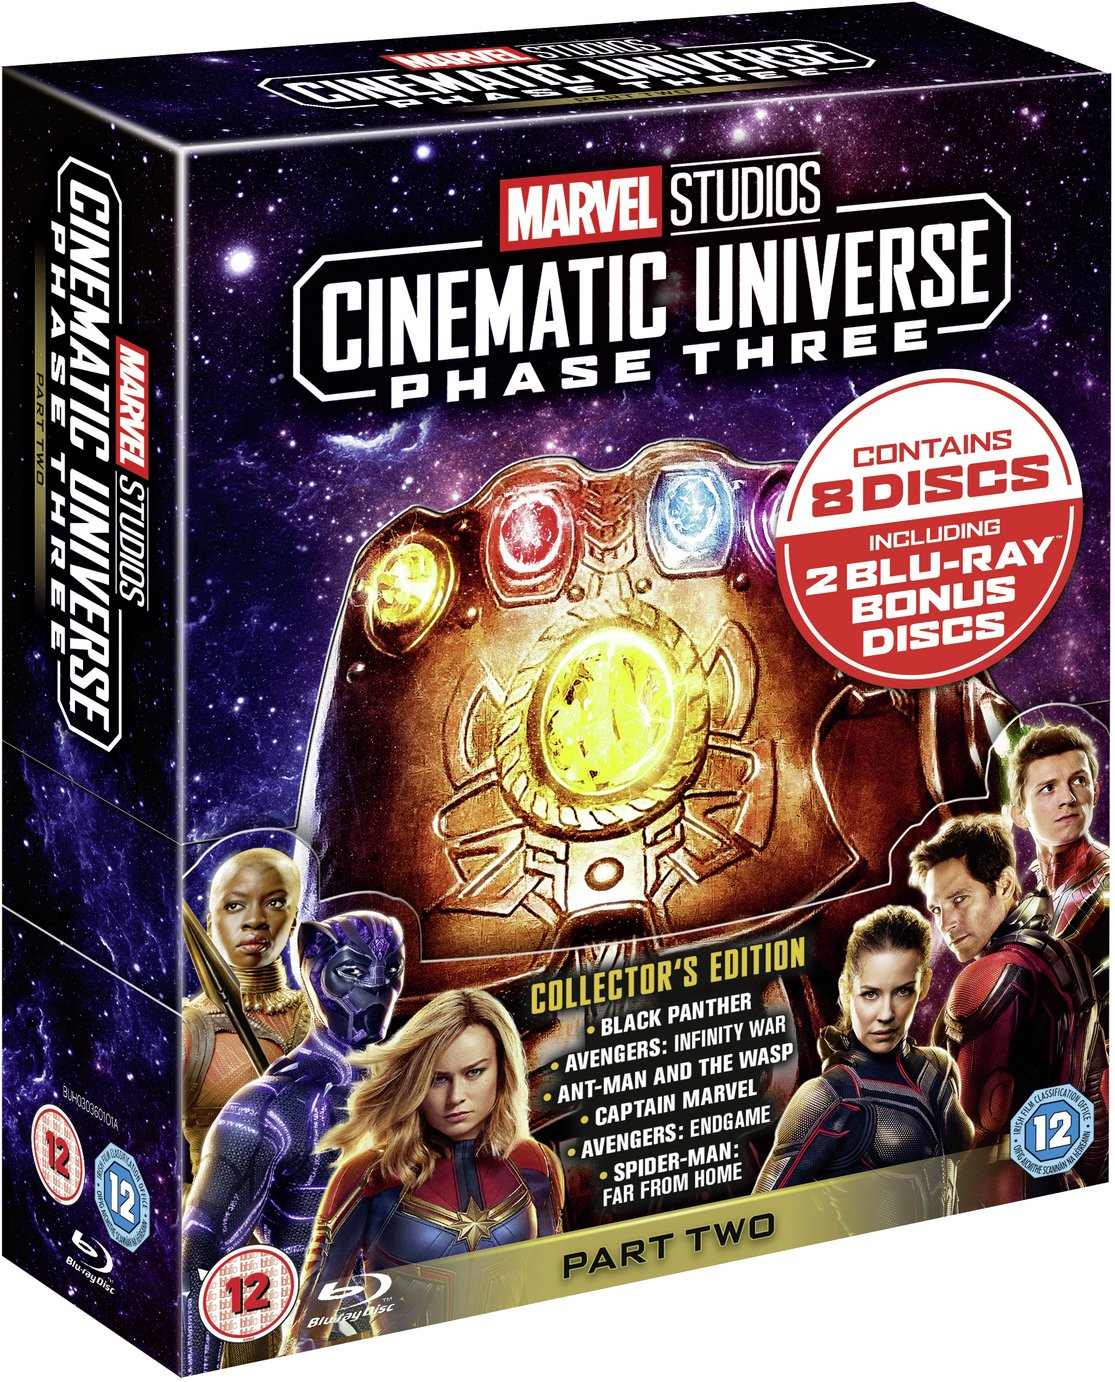 Marvel Studios Collector's Edition Phase 3 Blu-Ray Box Set